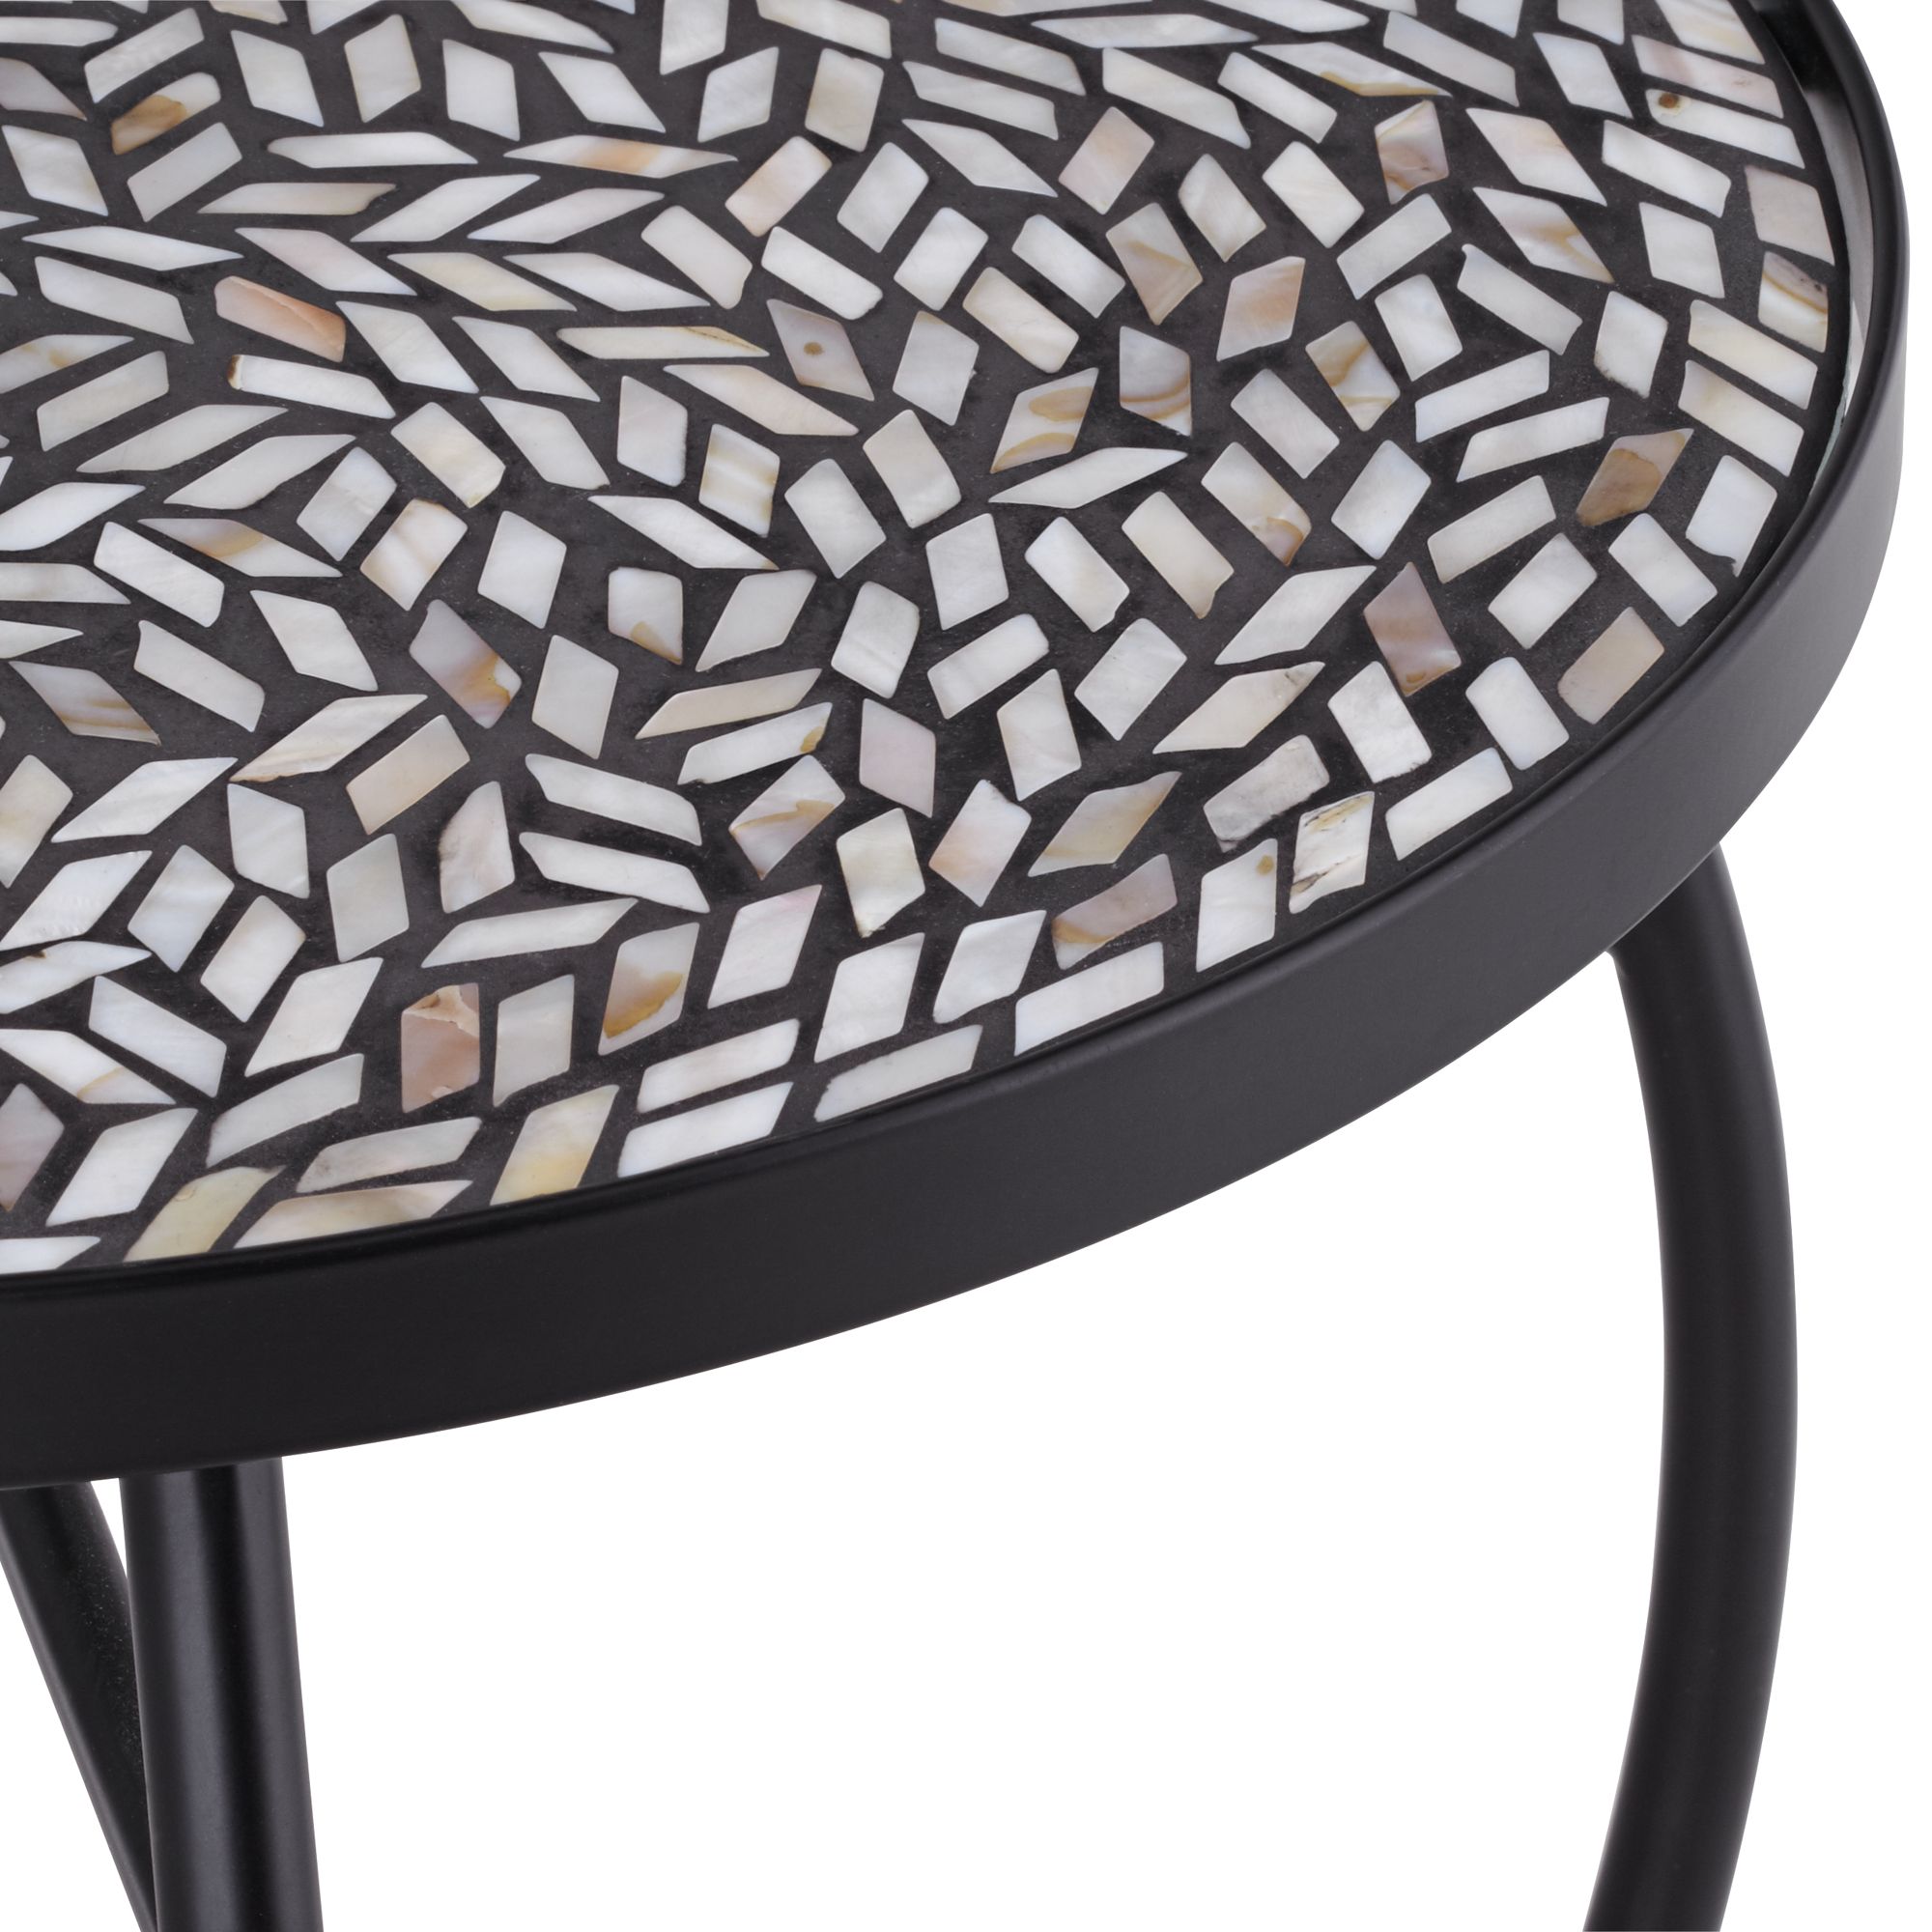 Teal Island Designs Modern Black Round Outdoor Accent Side Table 14" Wide Free-Form Mosaic Tabletop for Front Porch Patio Home House Balcony - image 3 of 7